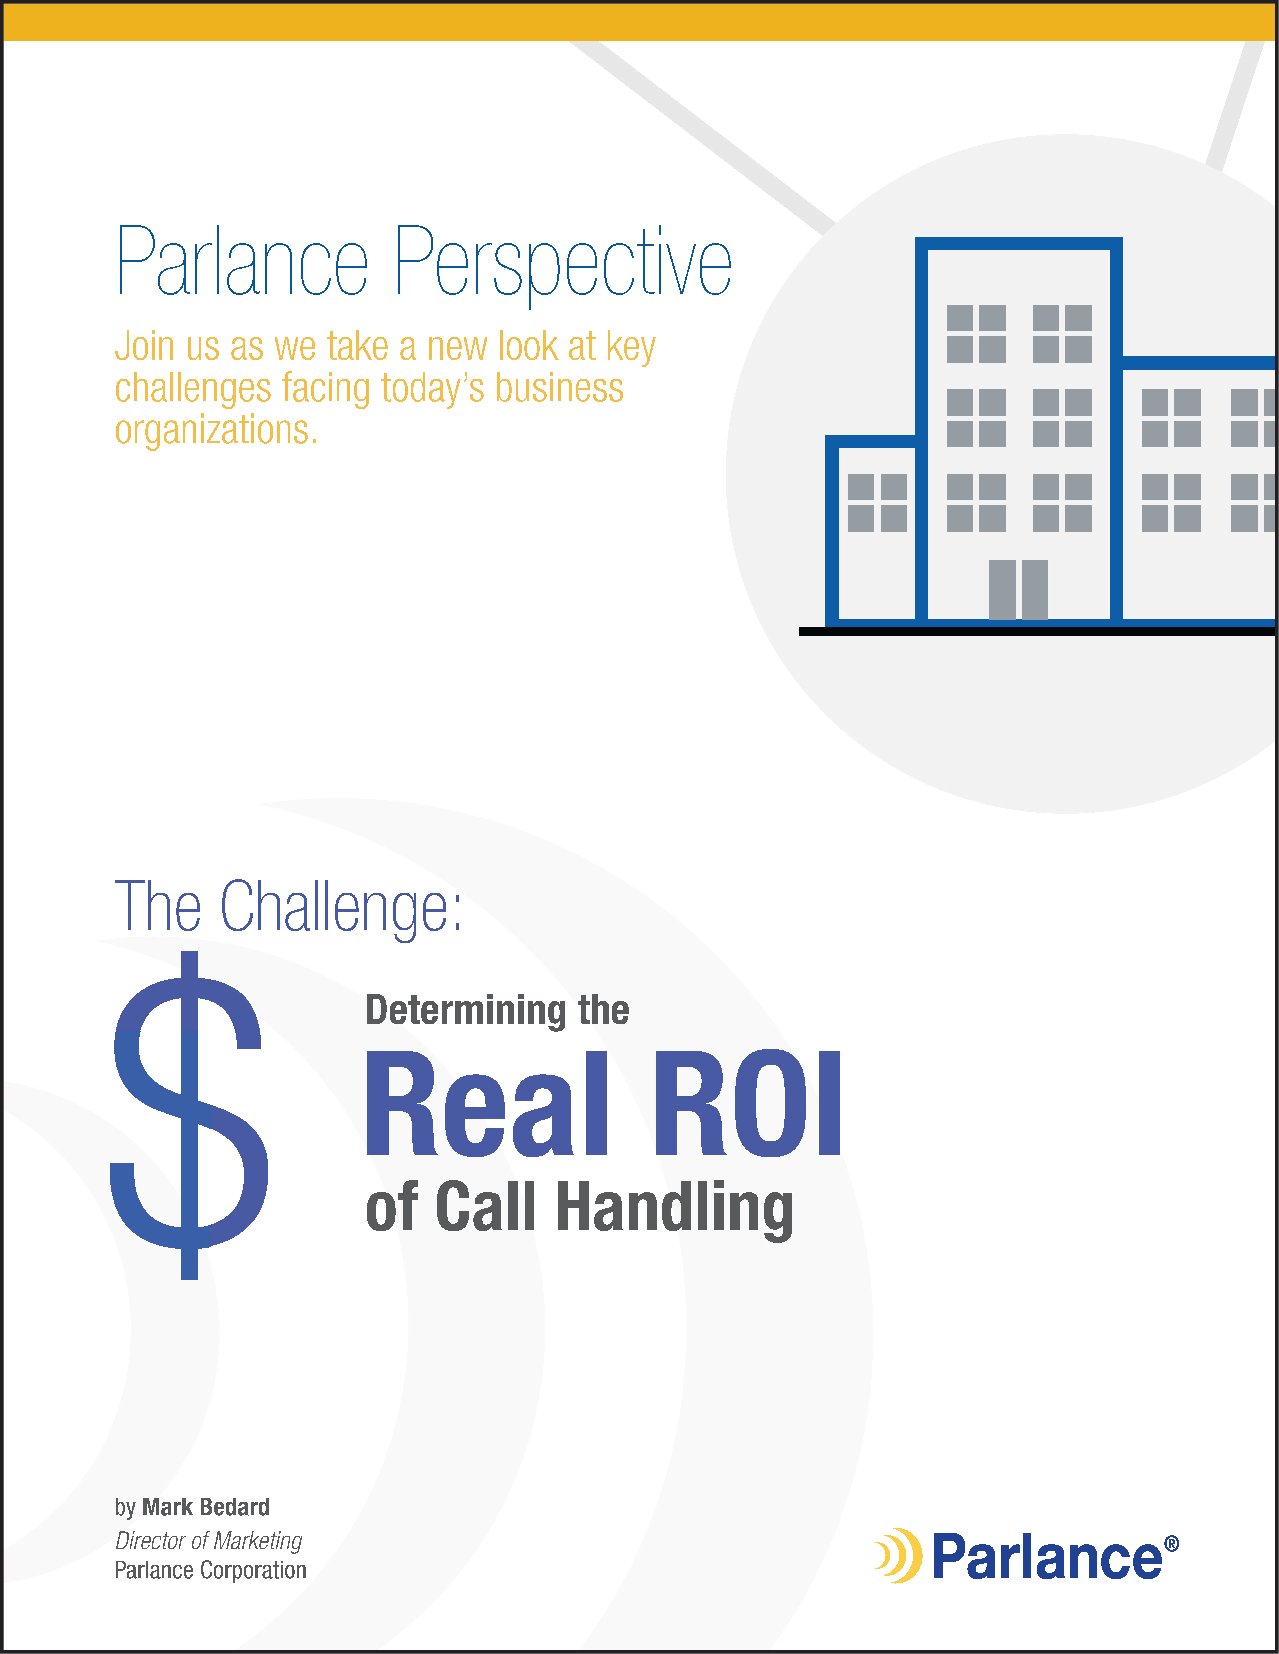 The Real ROI of Call Handling - All Industries 11.16.15_Page_1-1.jpg